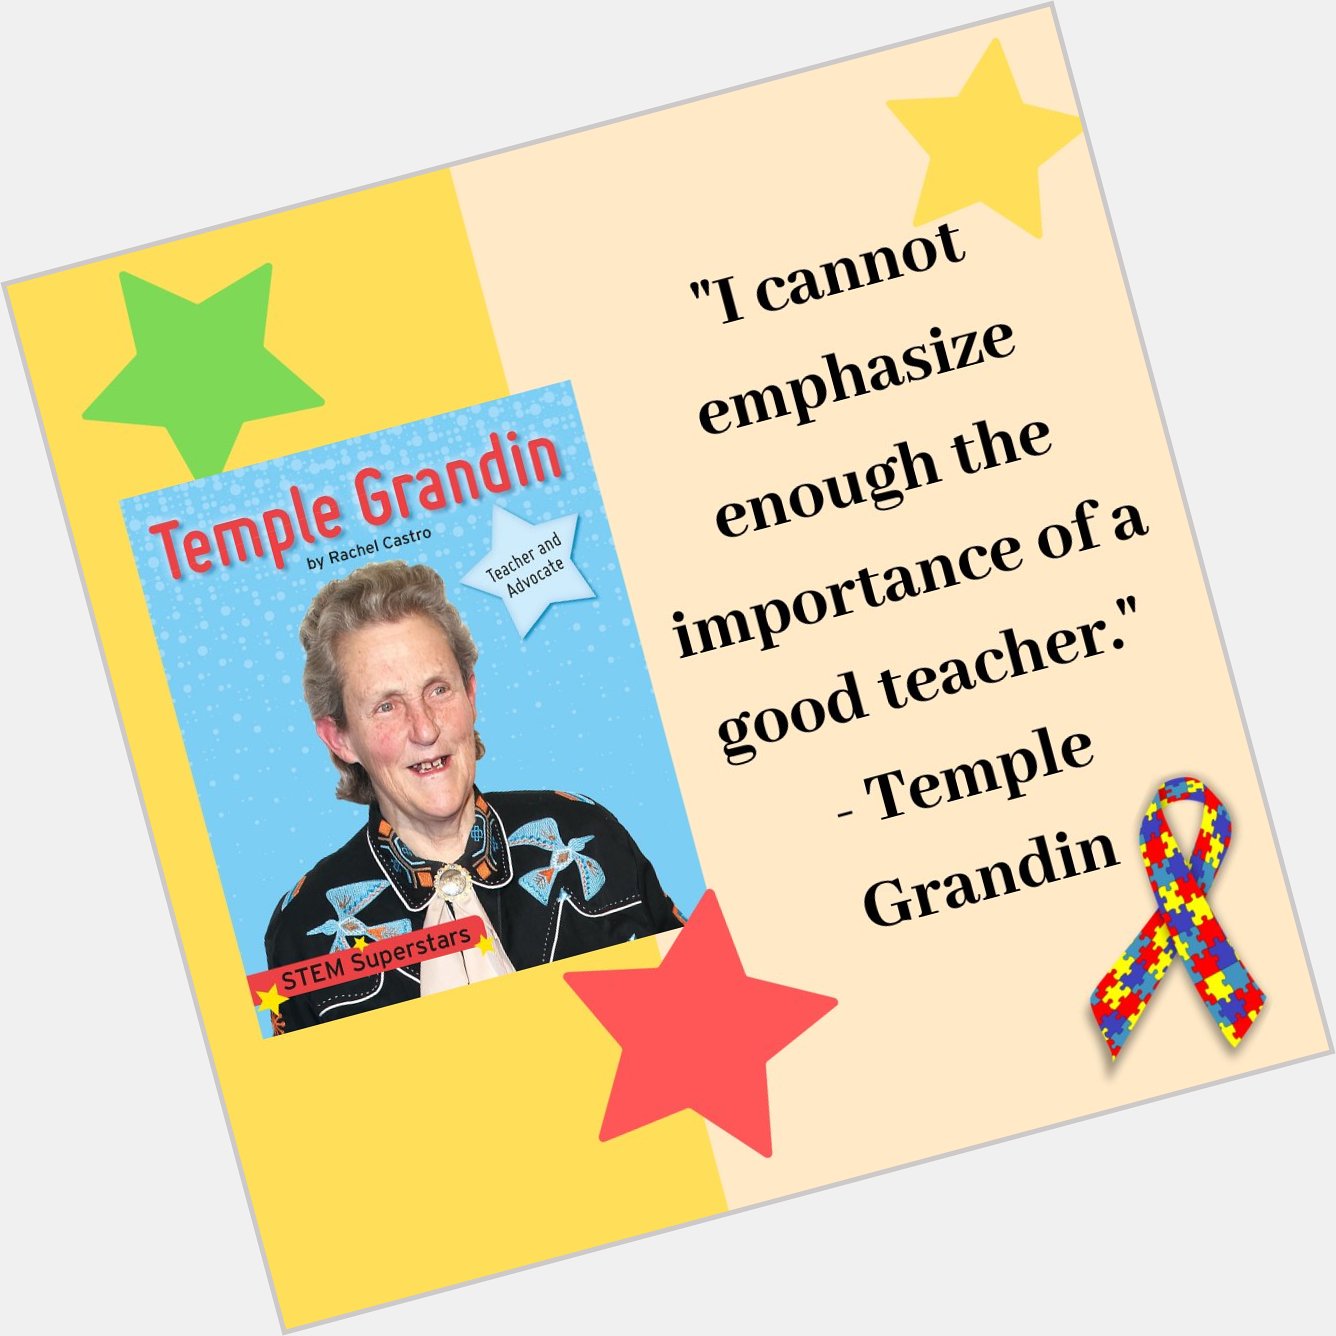 Happy Birthday Temple Grandin!

Click here to learn more about her amazing life:  